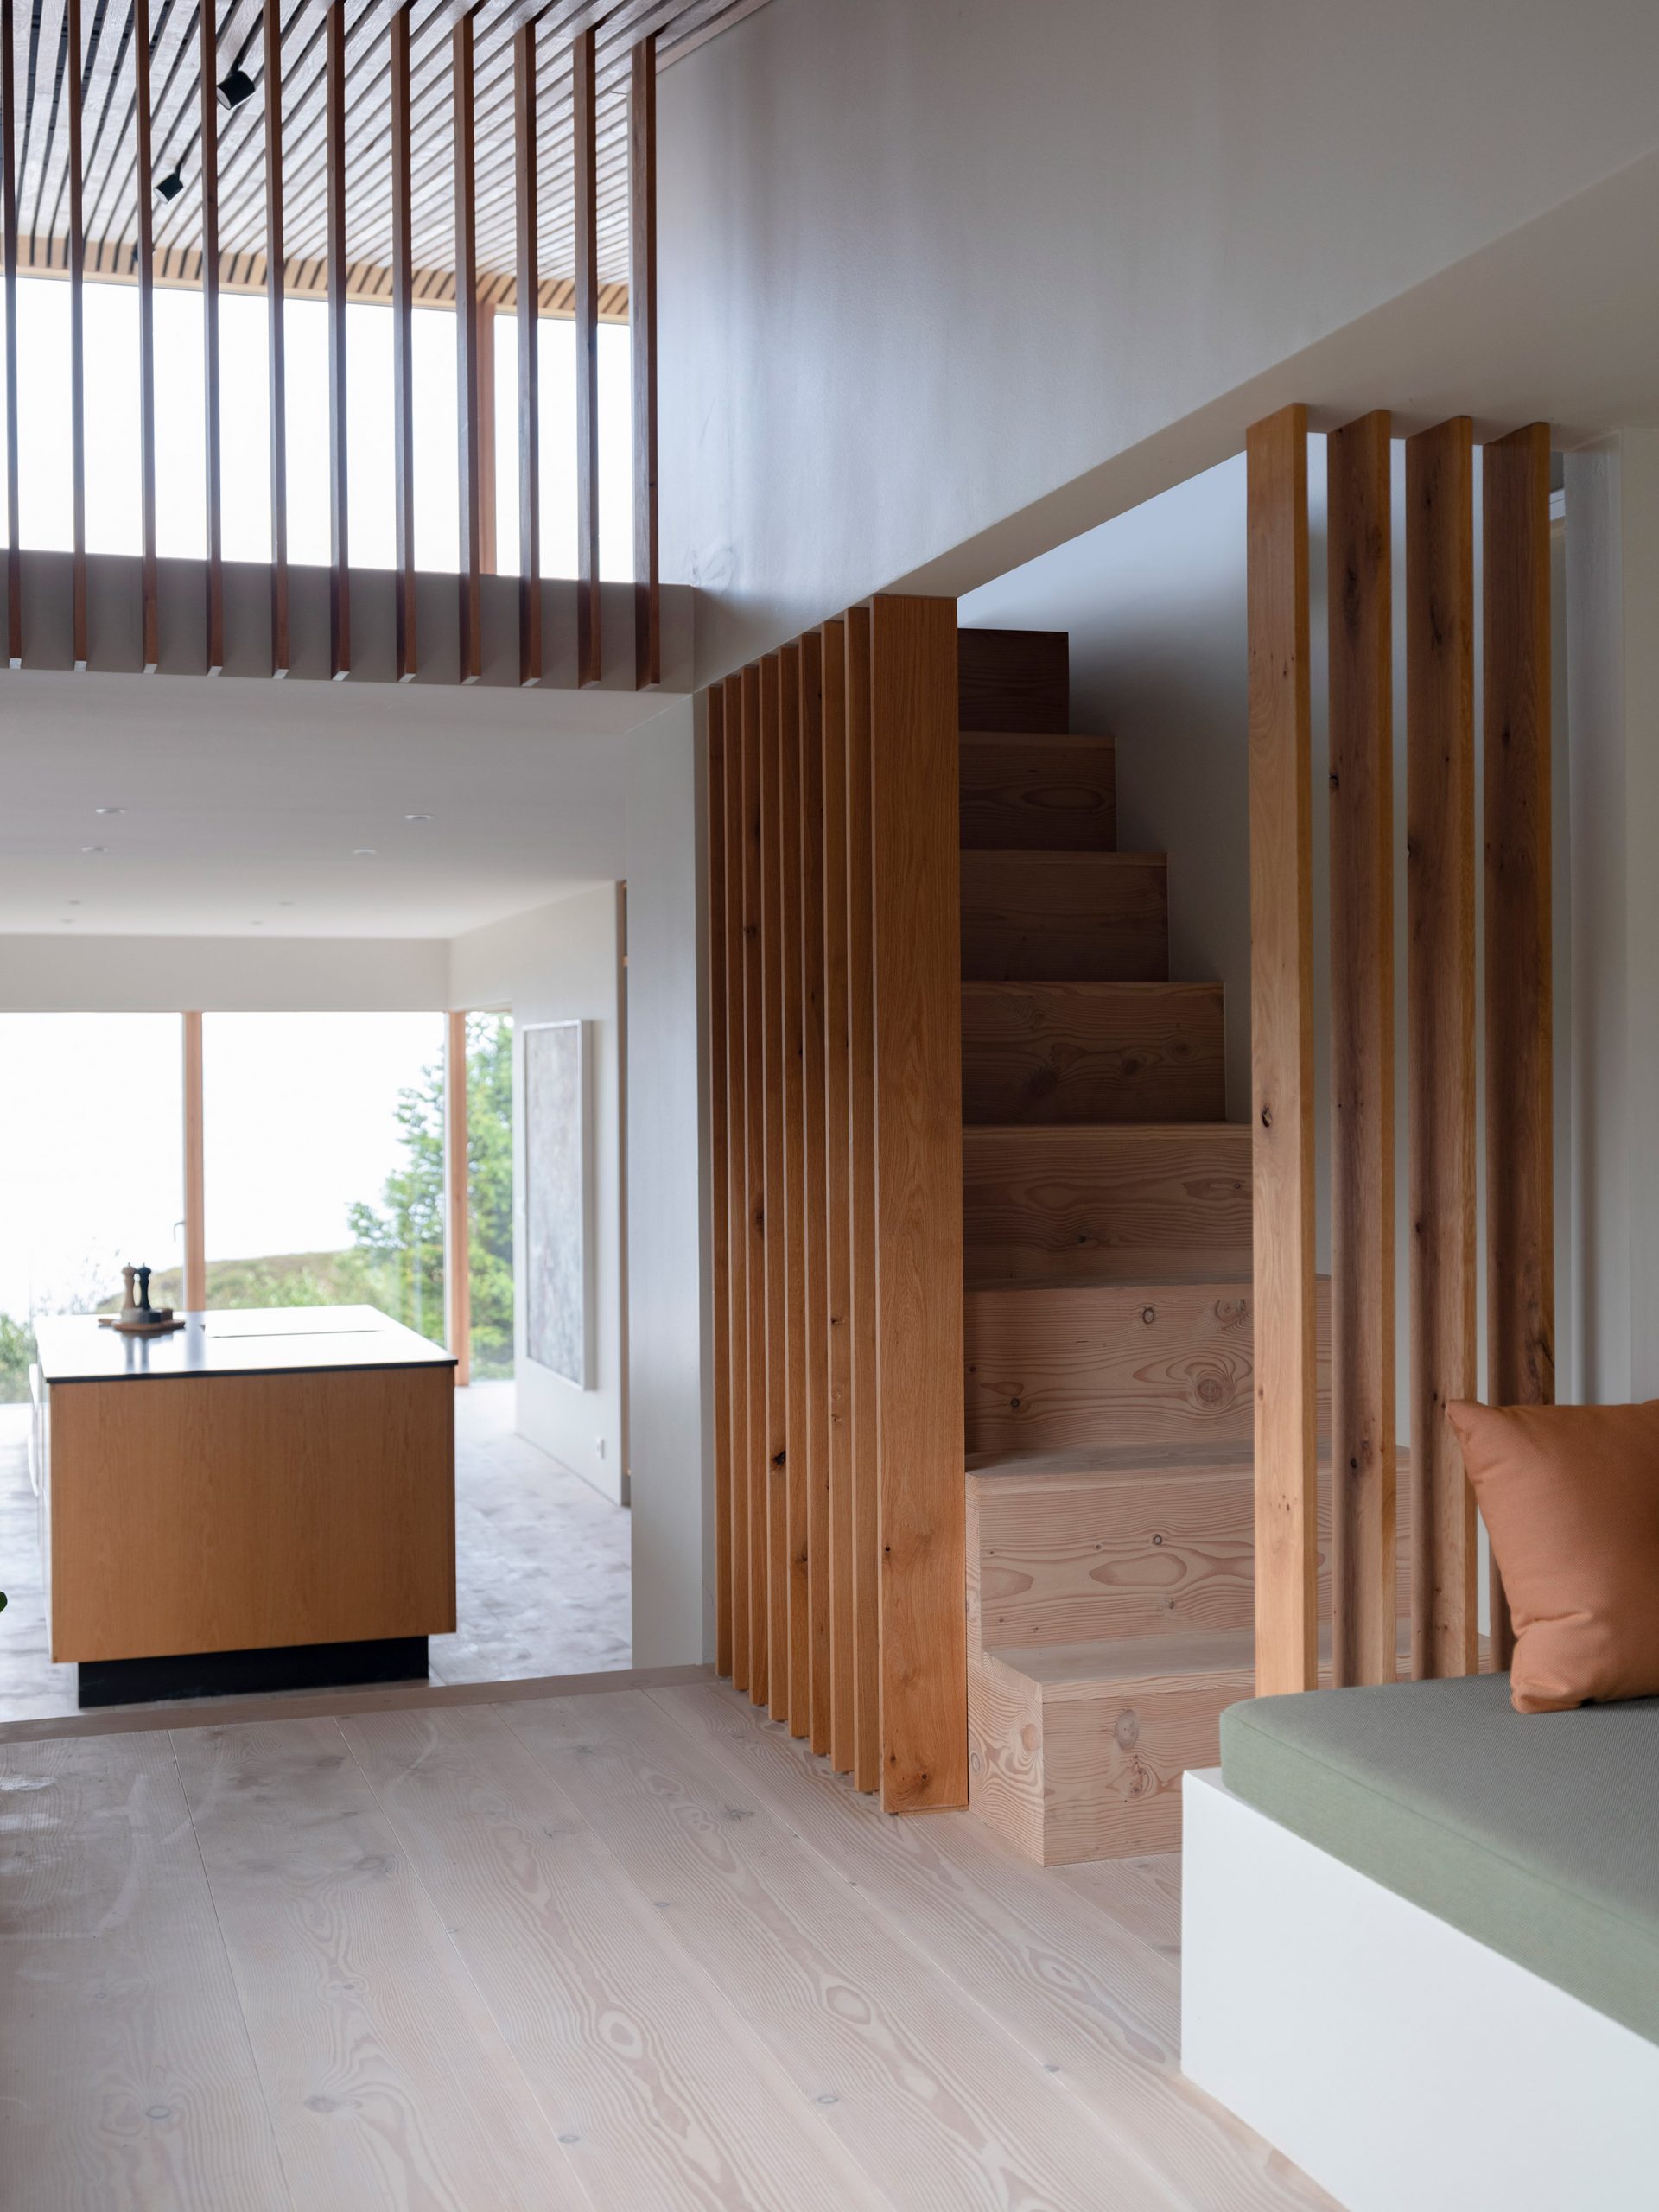 The neutral interiors of a holiday home by KRADS